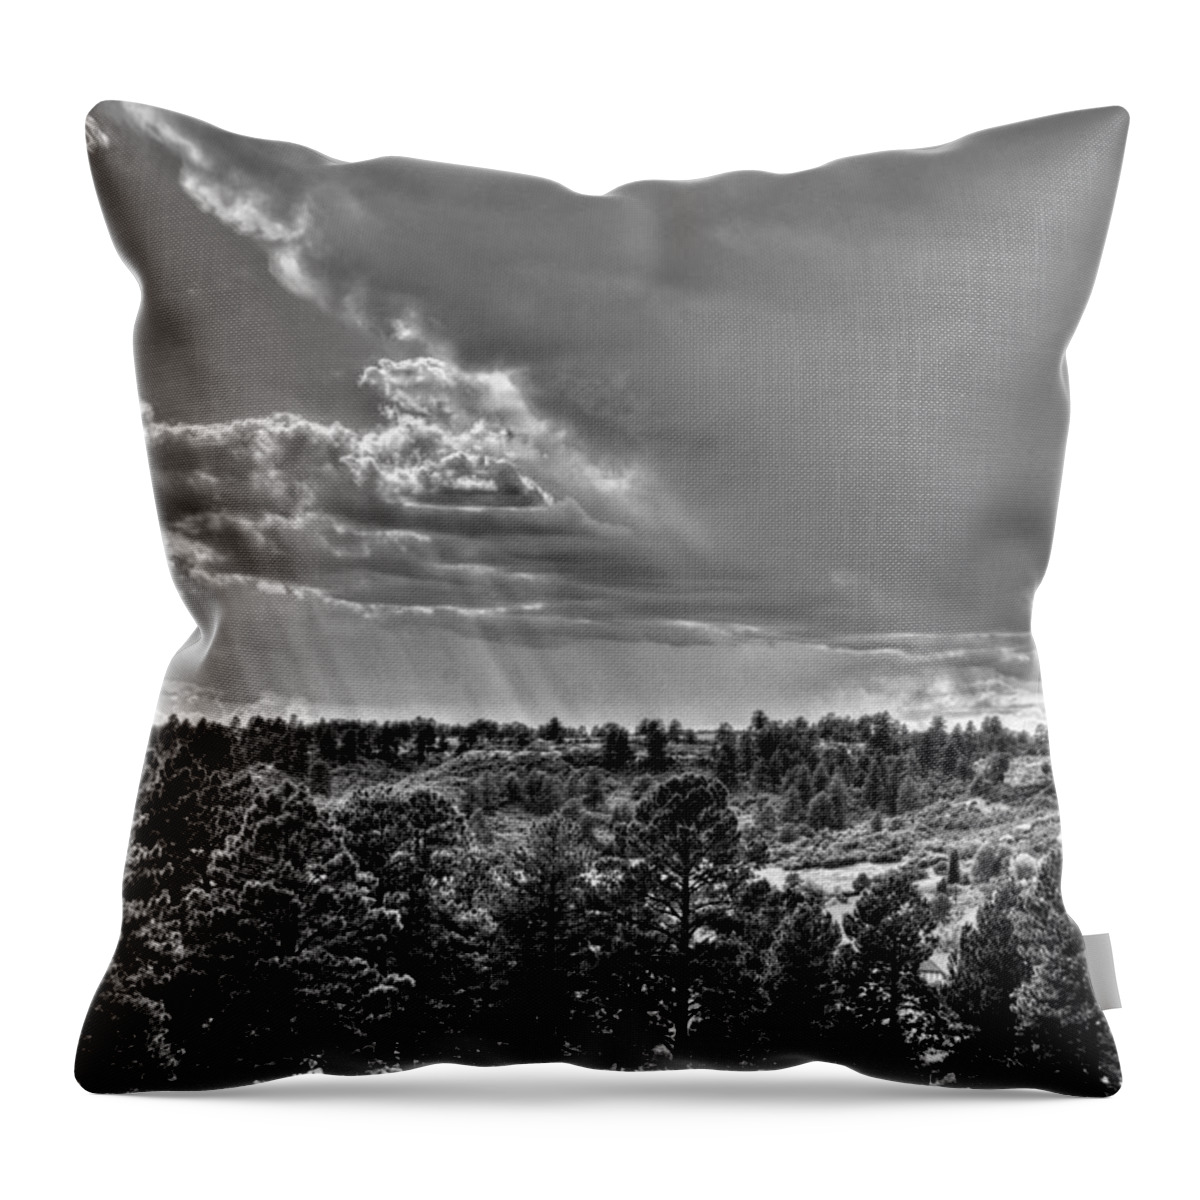 The Ridge Throw Pillow featuring the photograph The Ridge Golf Course by Ron White